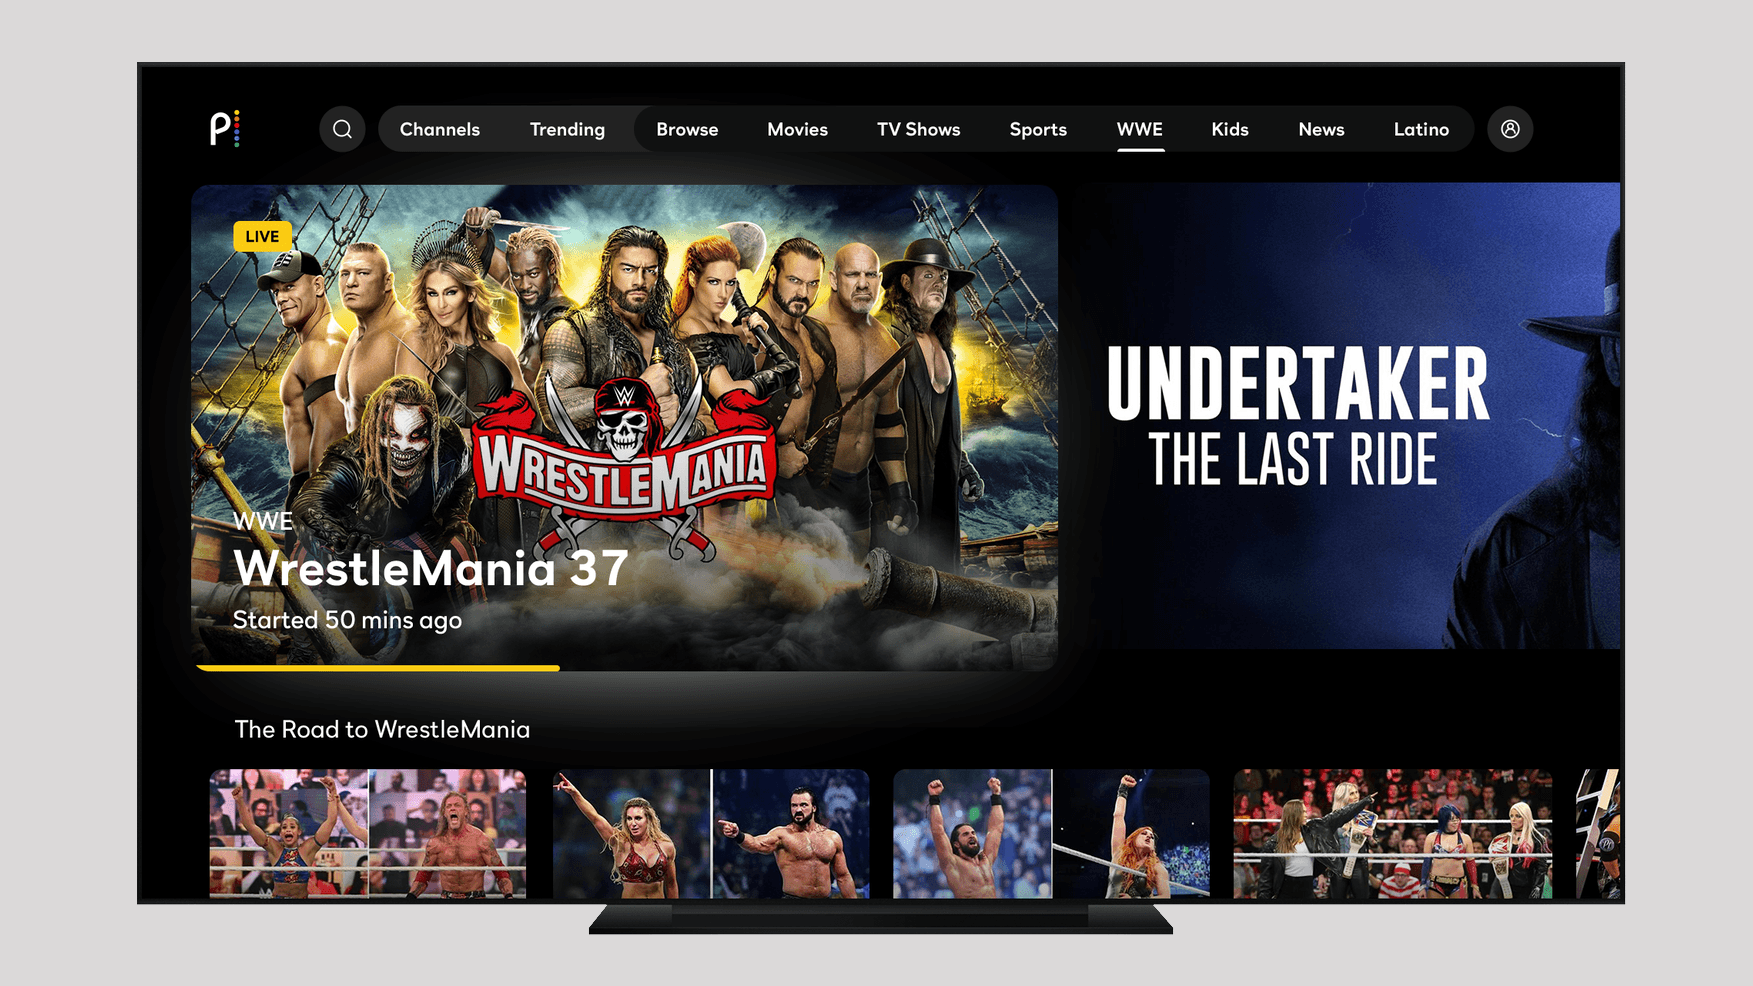 How to Watch Wrestlemania on April 10-11